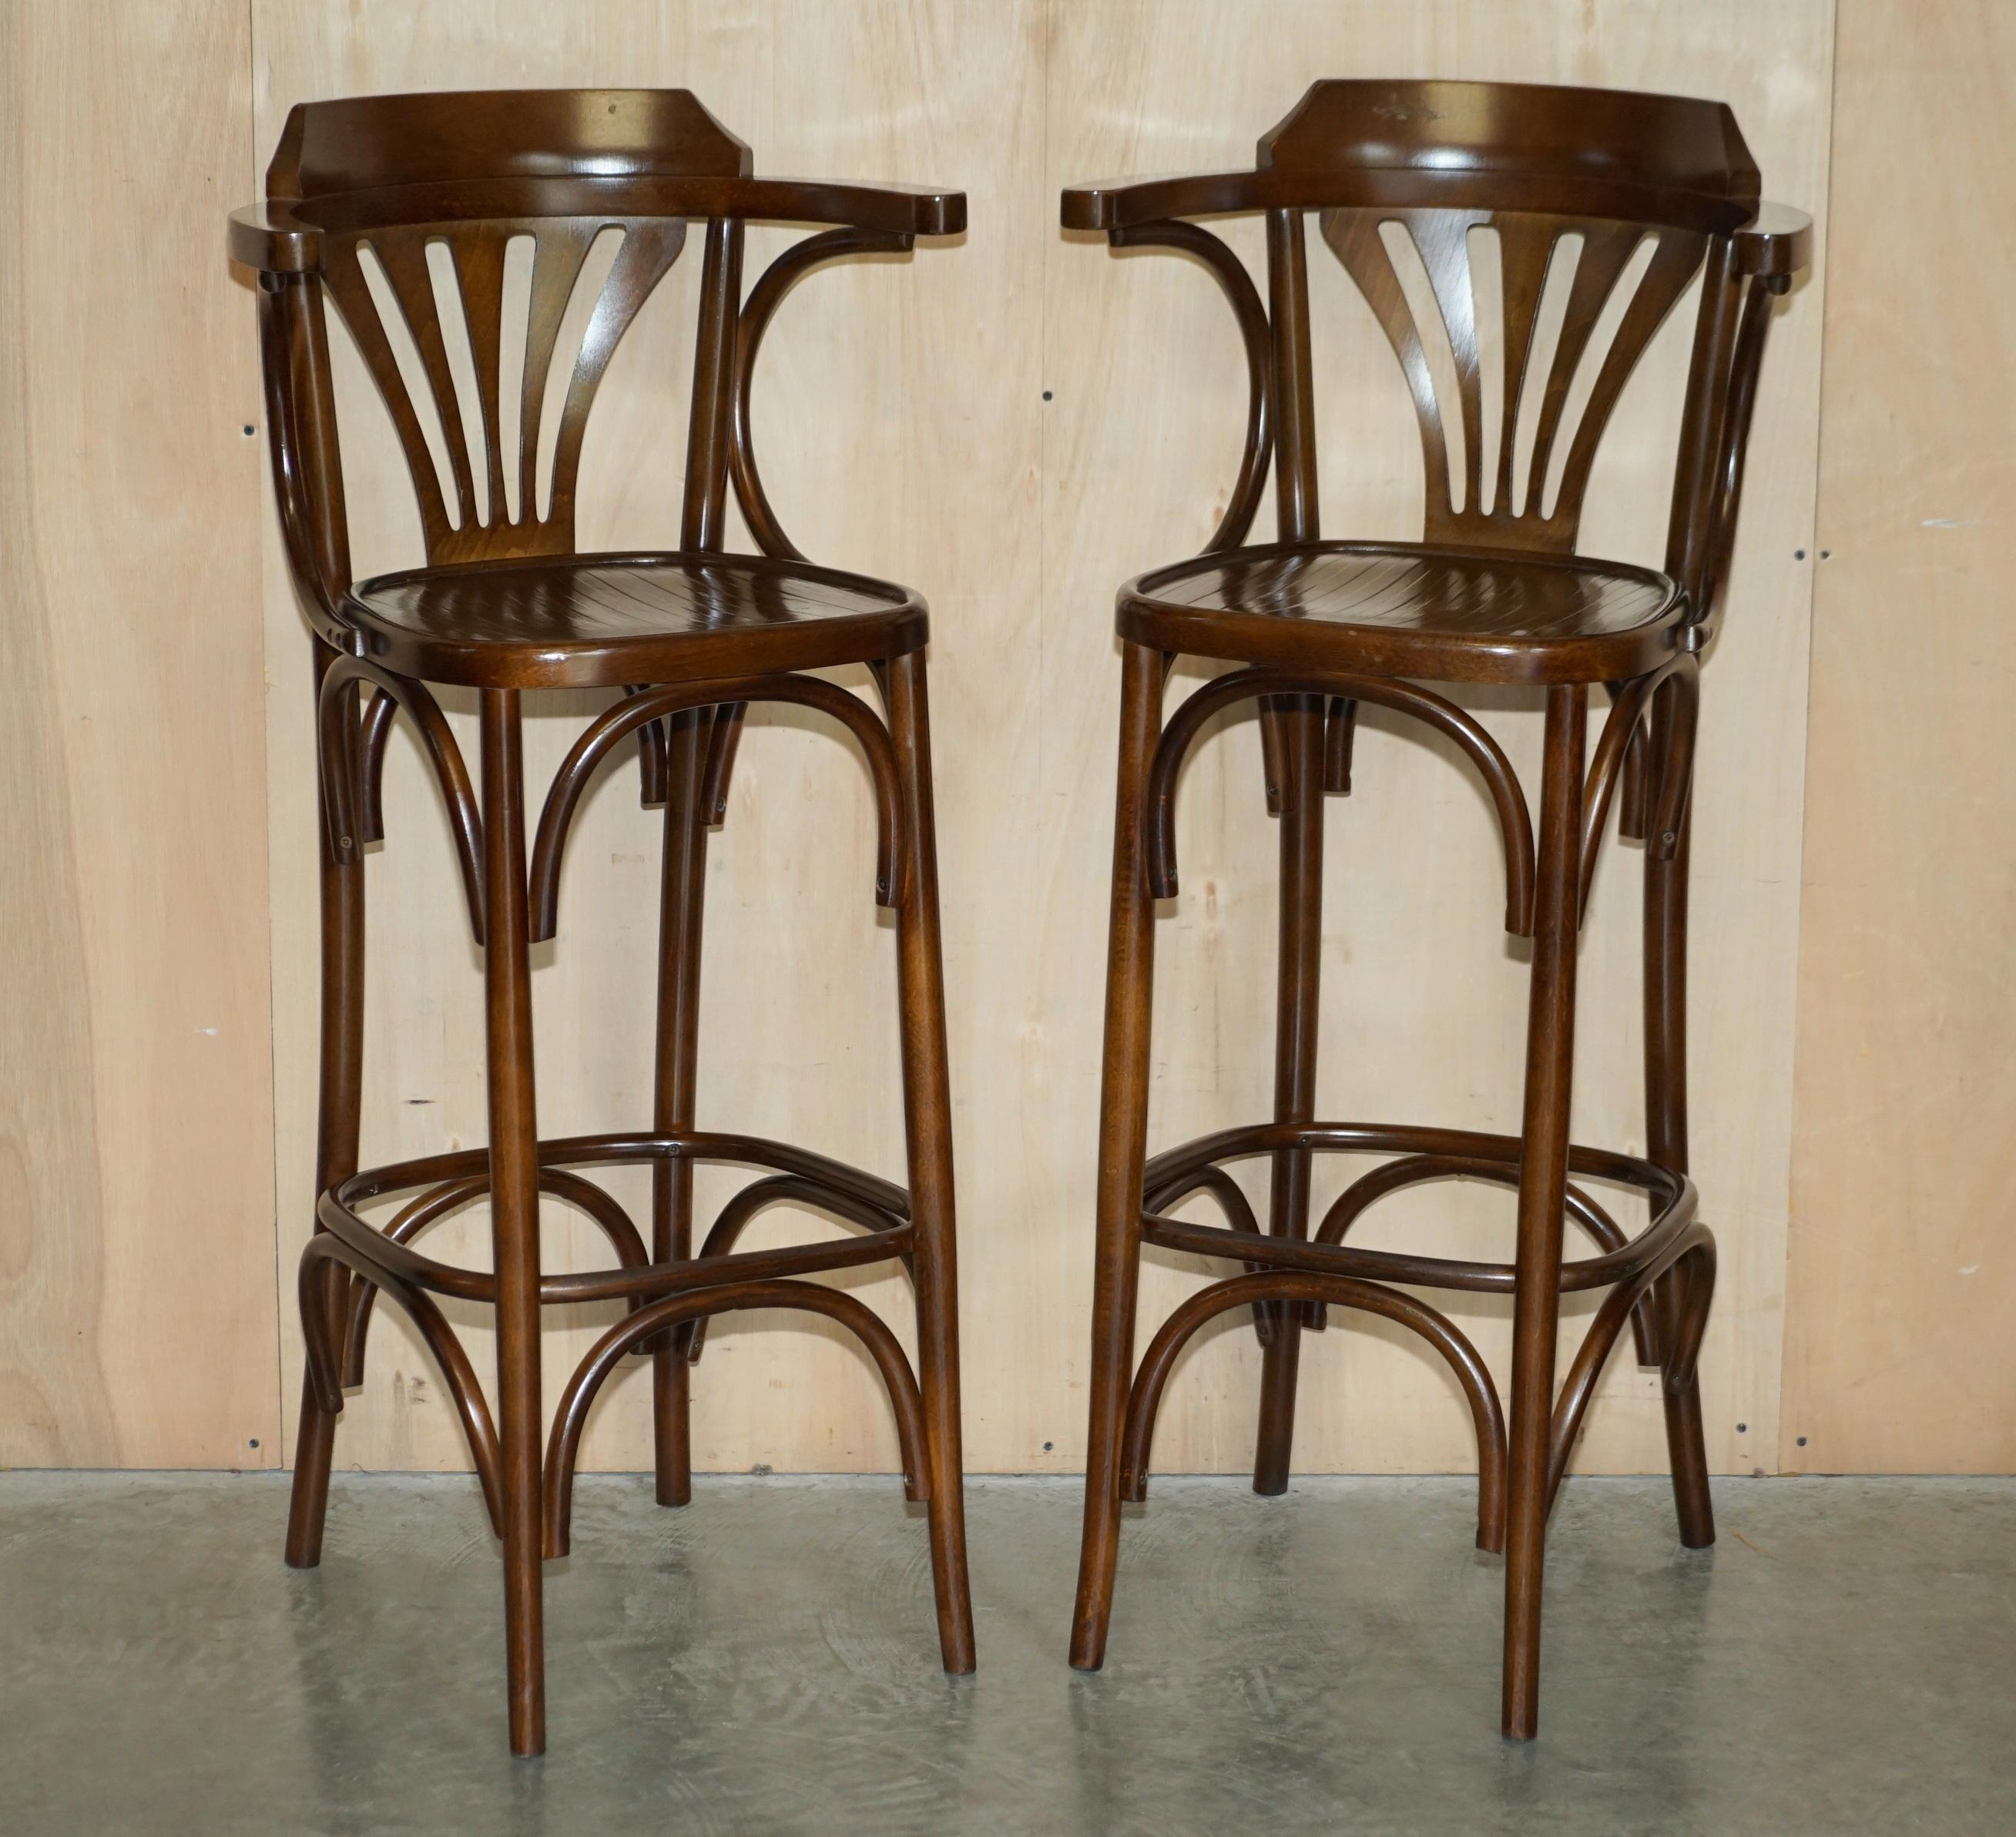 We are delighted to offer for sale this set of four vintage Thonet style bentwood bar stools.

They very good looking and really quite comfortable, the timber grain and patina is quite decorative.

We have deep cleaned hand condition waxed and